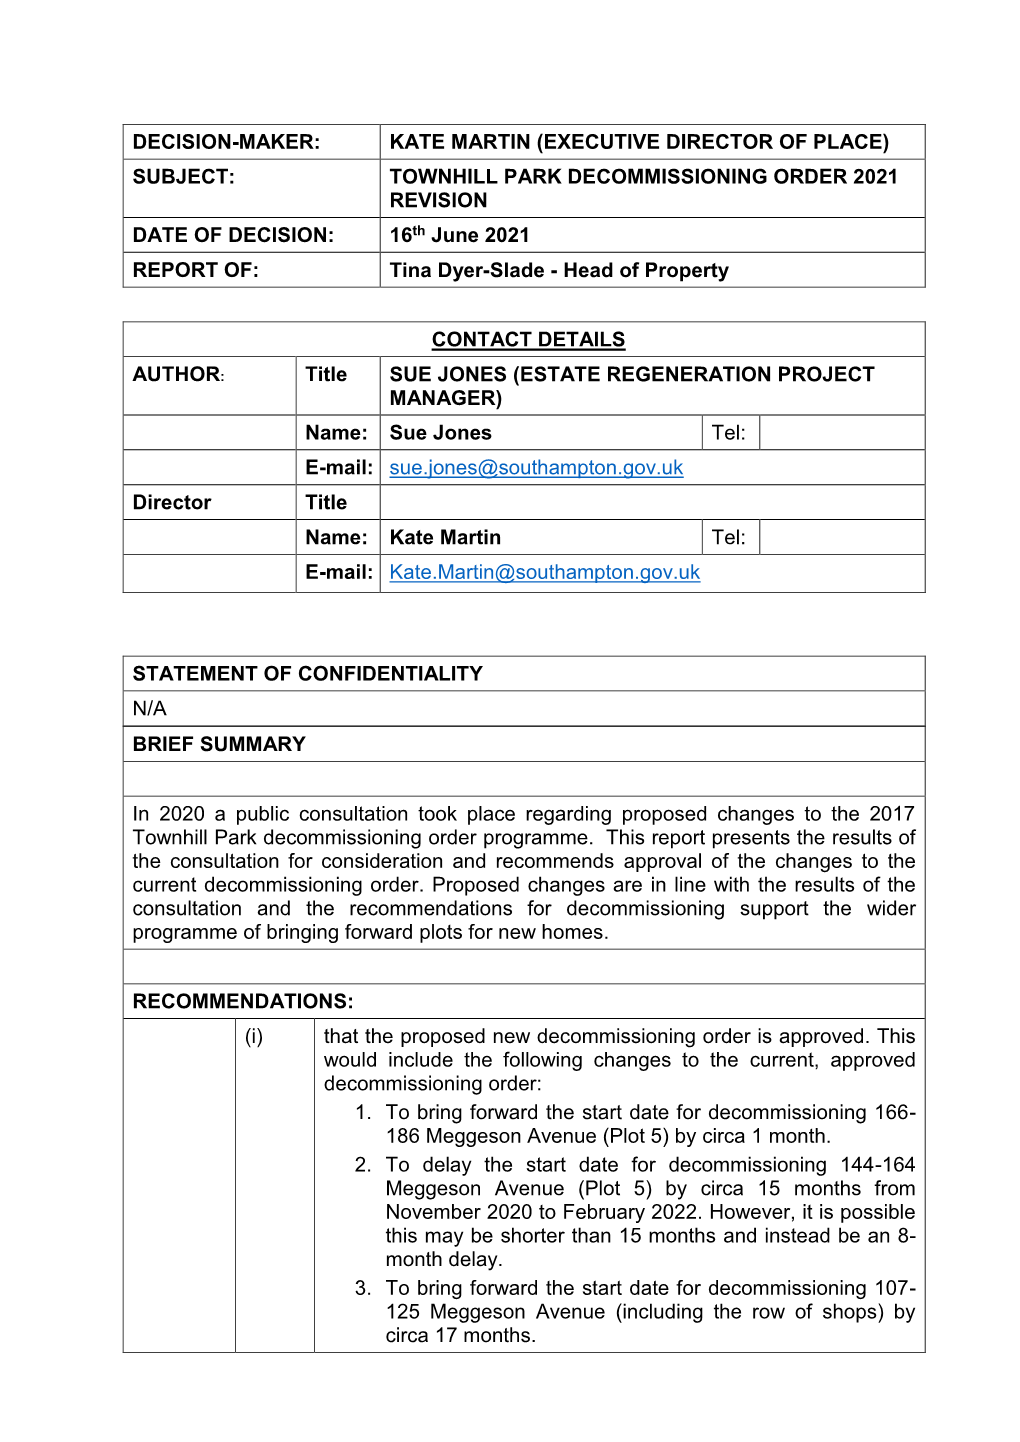 SUBJECT: TOWNHILL PARK DECOMMISSIONING ORDER 2021 REVISION DATE of DECISION: 16Th June 2021 REPORT OF: Tina Dyer-Slade - Head of Property